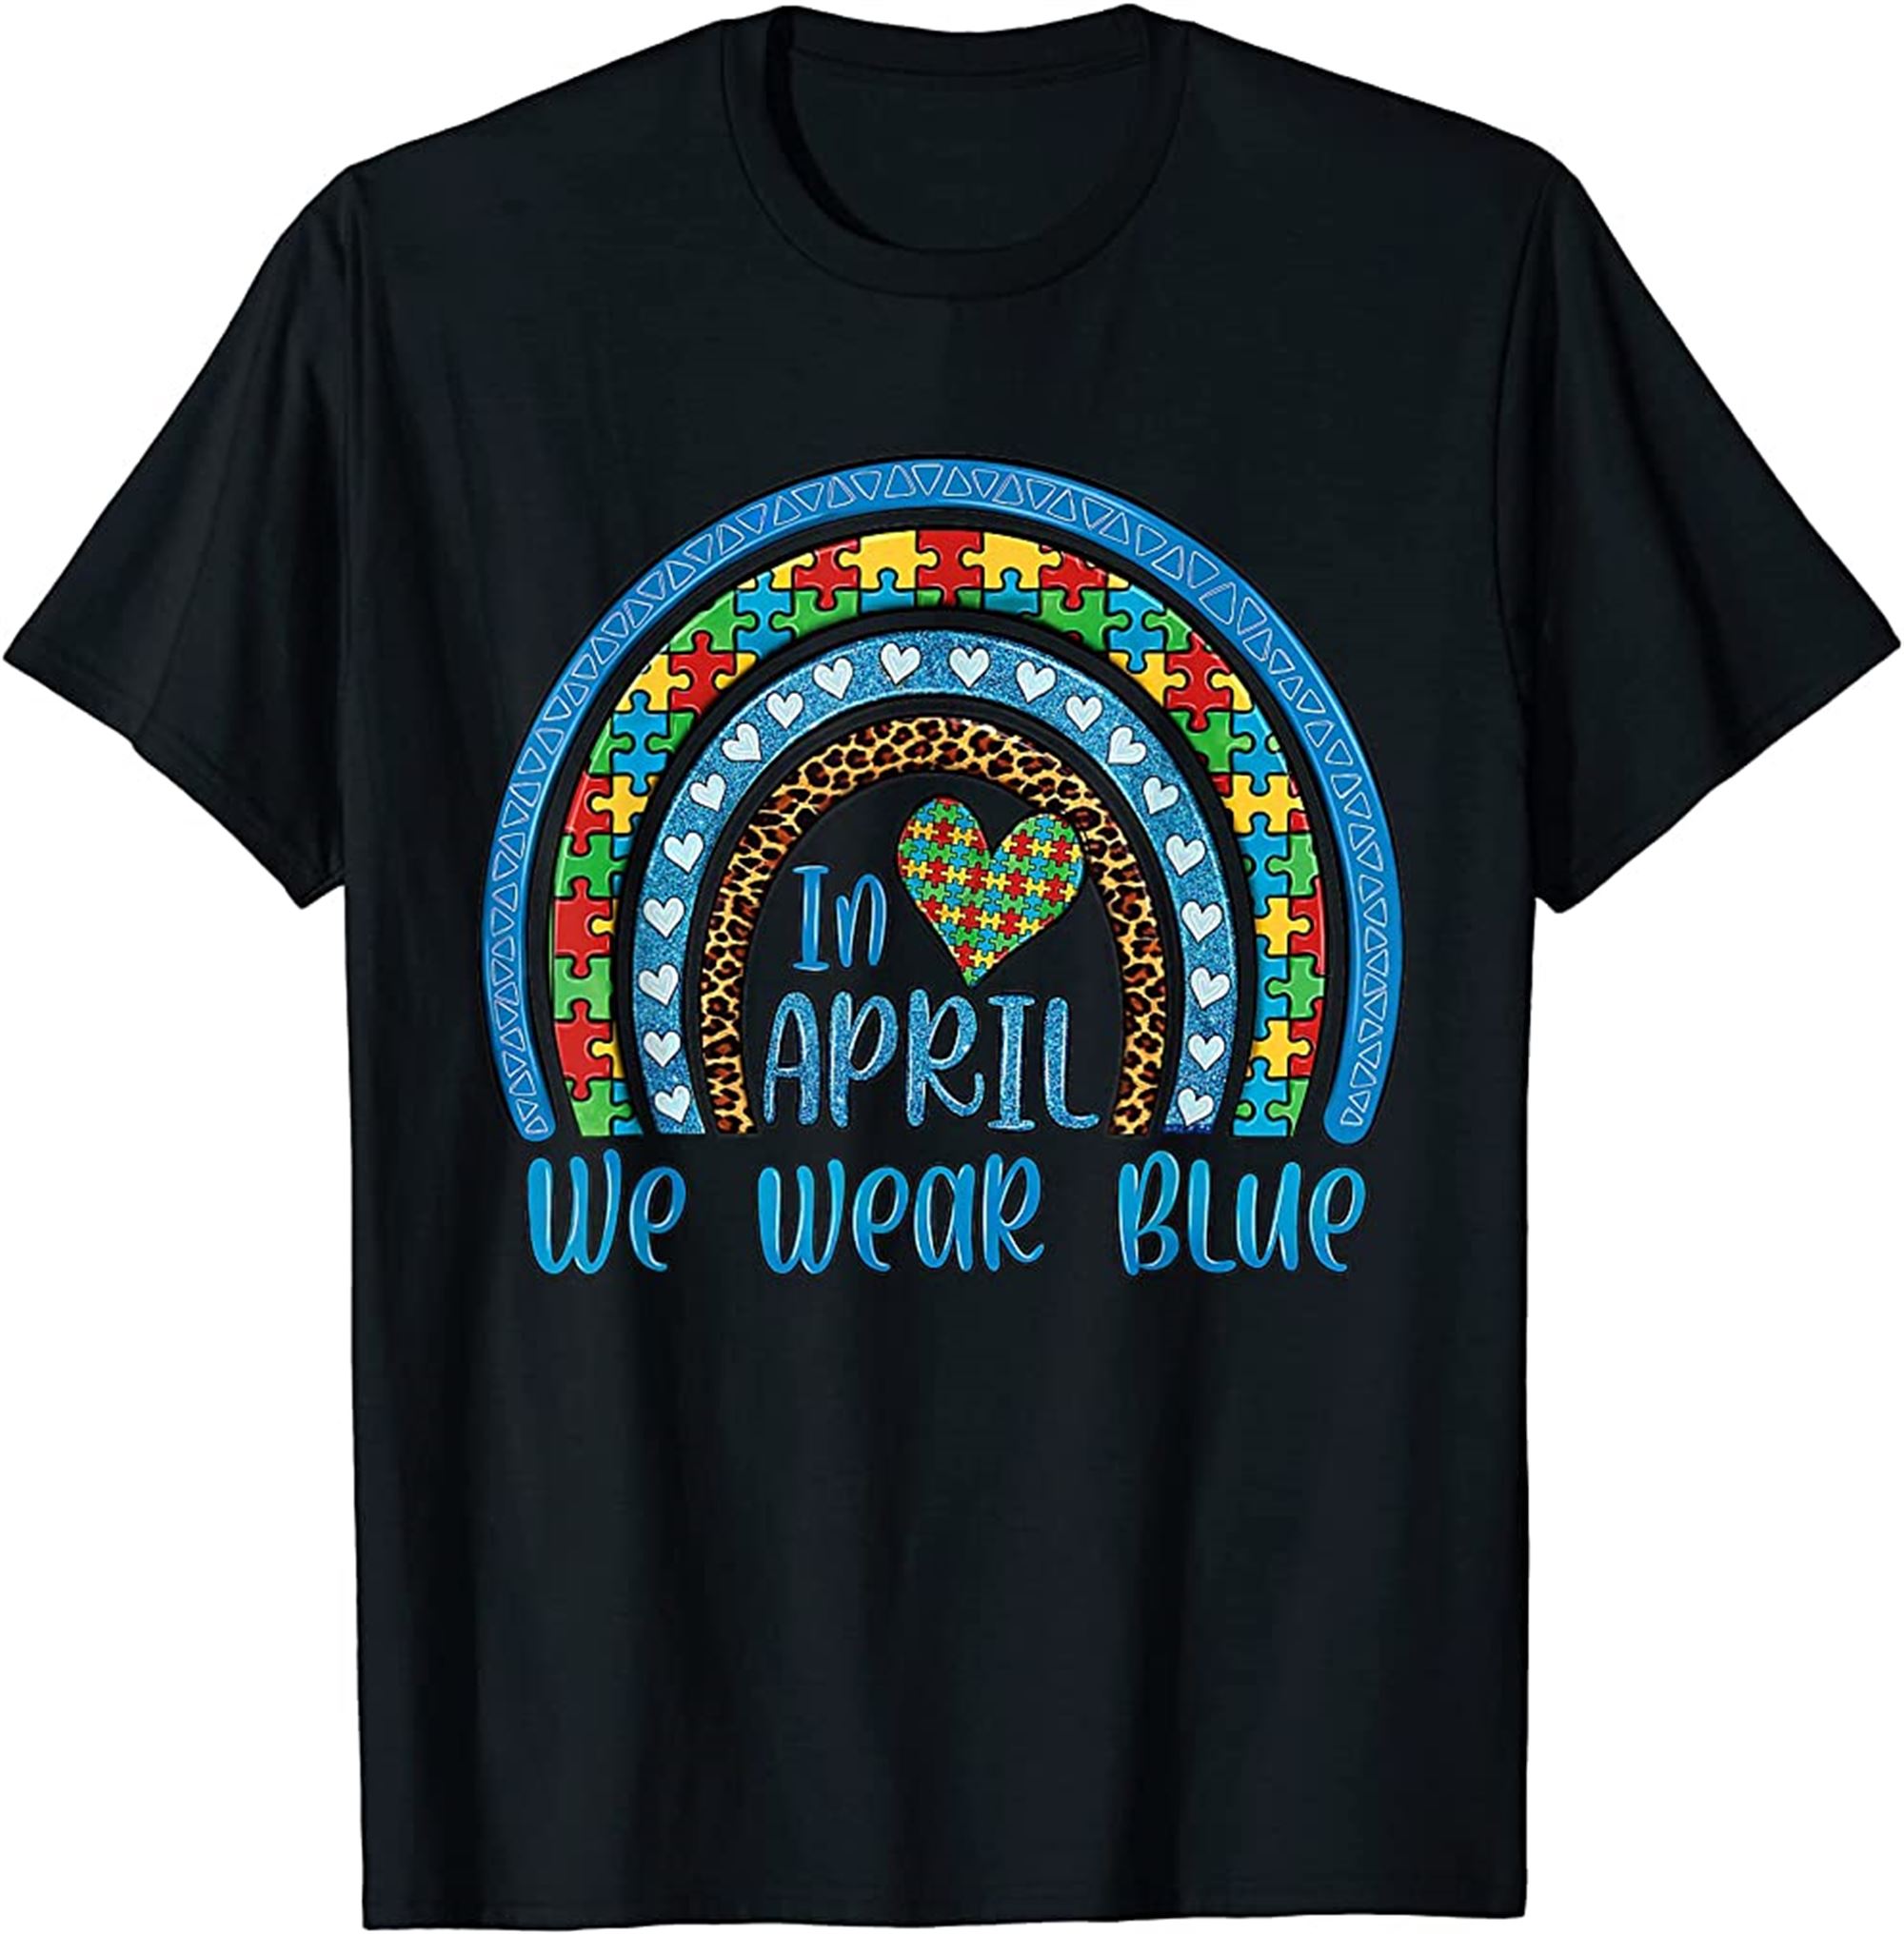 Rainbow Puzzle Autism In April We Wear Blue Autism Awareness T-shirt Full Size Up To 5xl